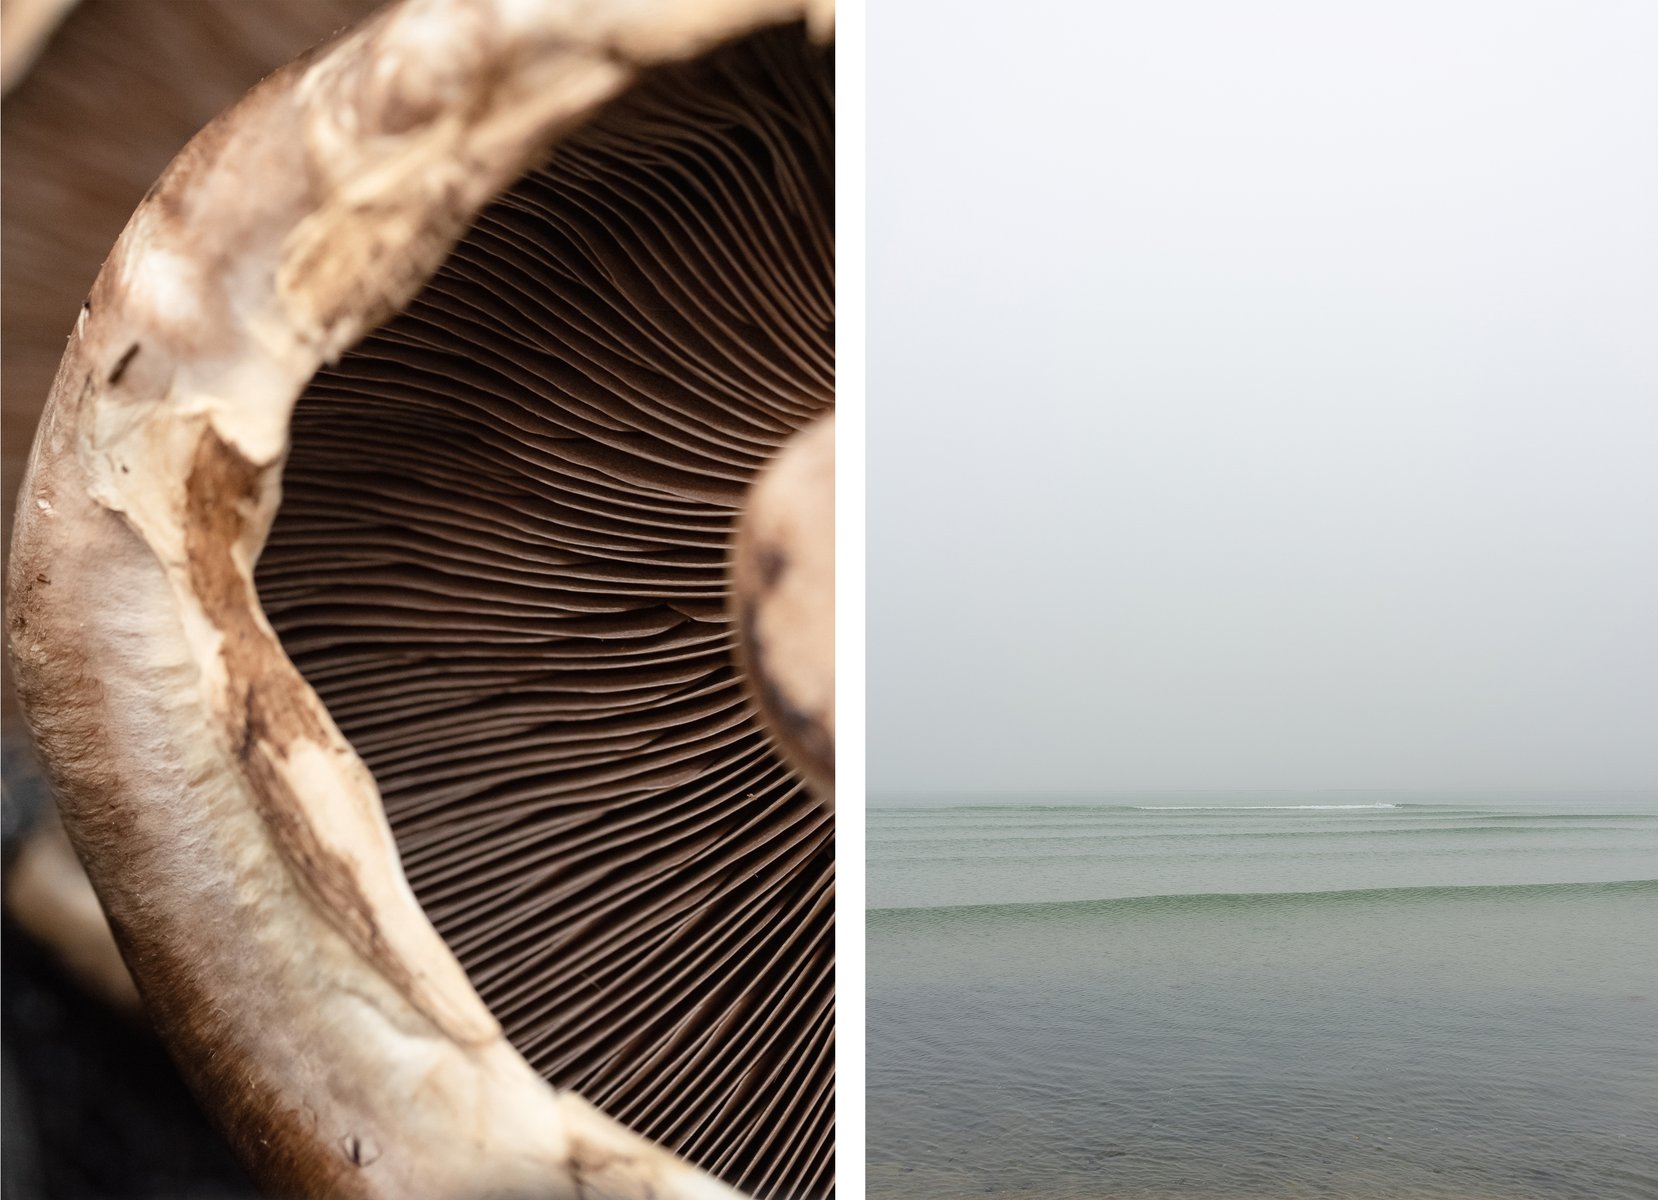  Personal Work
Diptych:

Left image: a macro photo of the gills inside of a portobello mushroom.

Right image: a hazy image of sharp waves rolling across the ocean. by Sydney SG